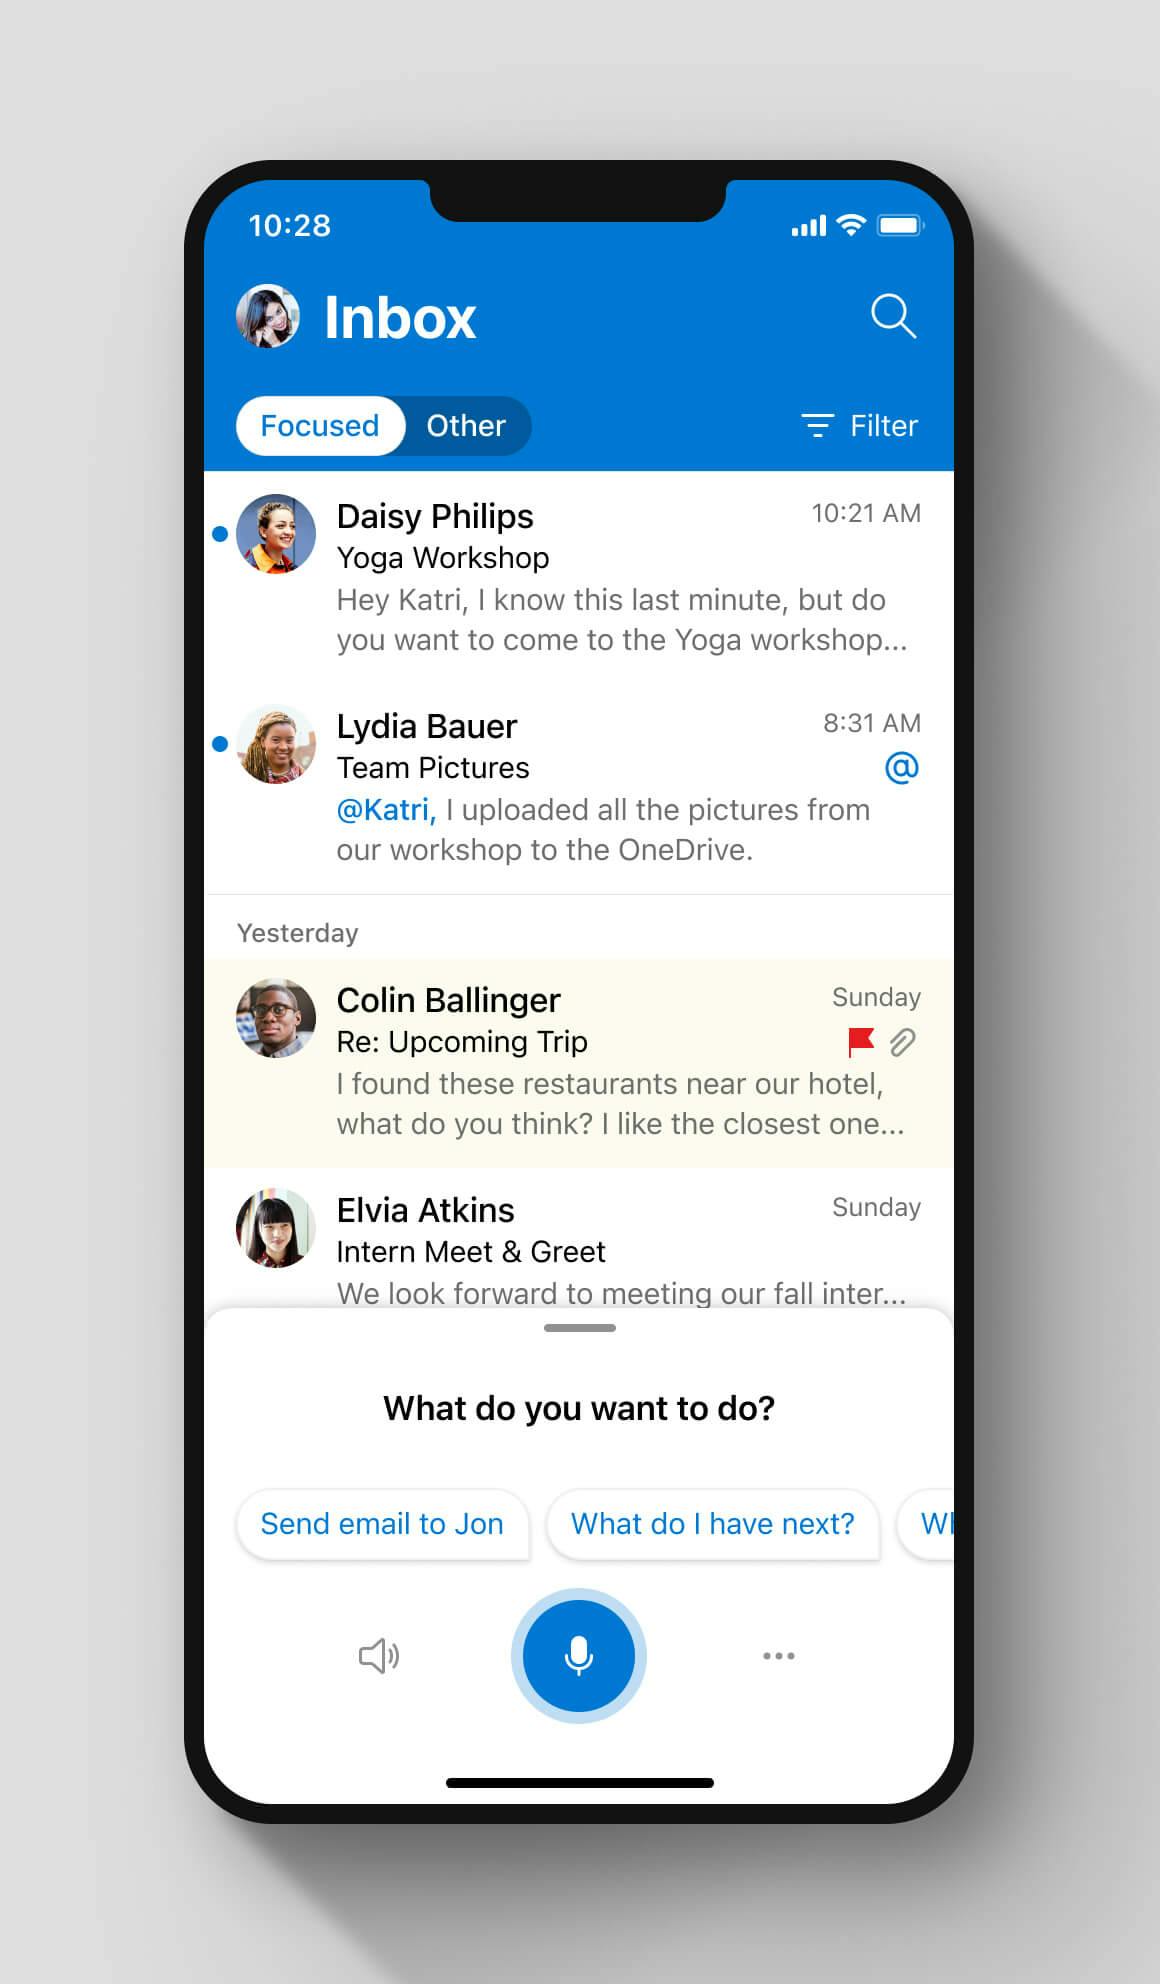 Email inbox on a Outlook Mobile application with a list of emails from different senders, each accompanied by their profile pictures. At the bottom, theres a voice assistant interface with tappable suggestions.